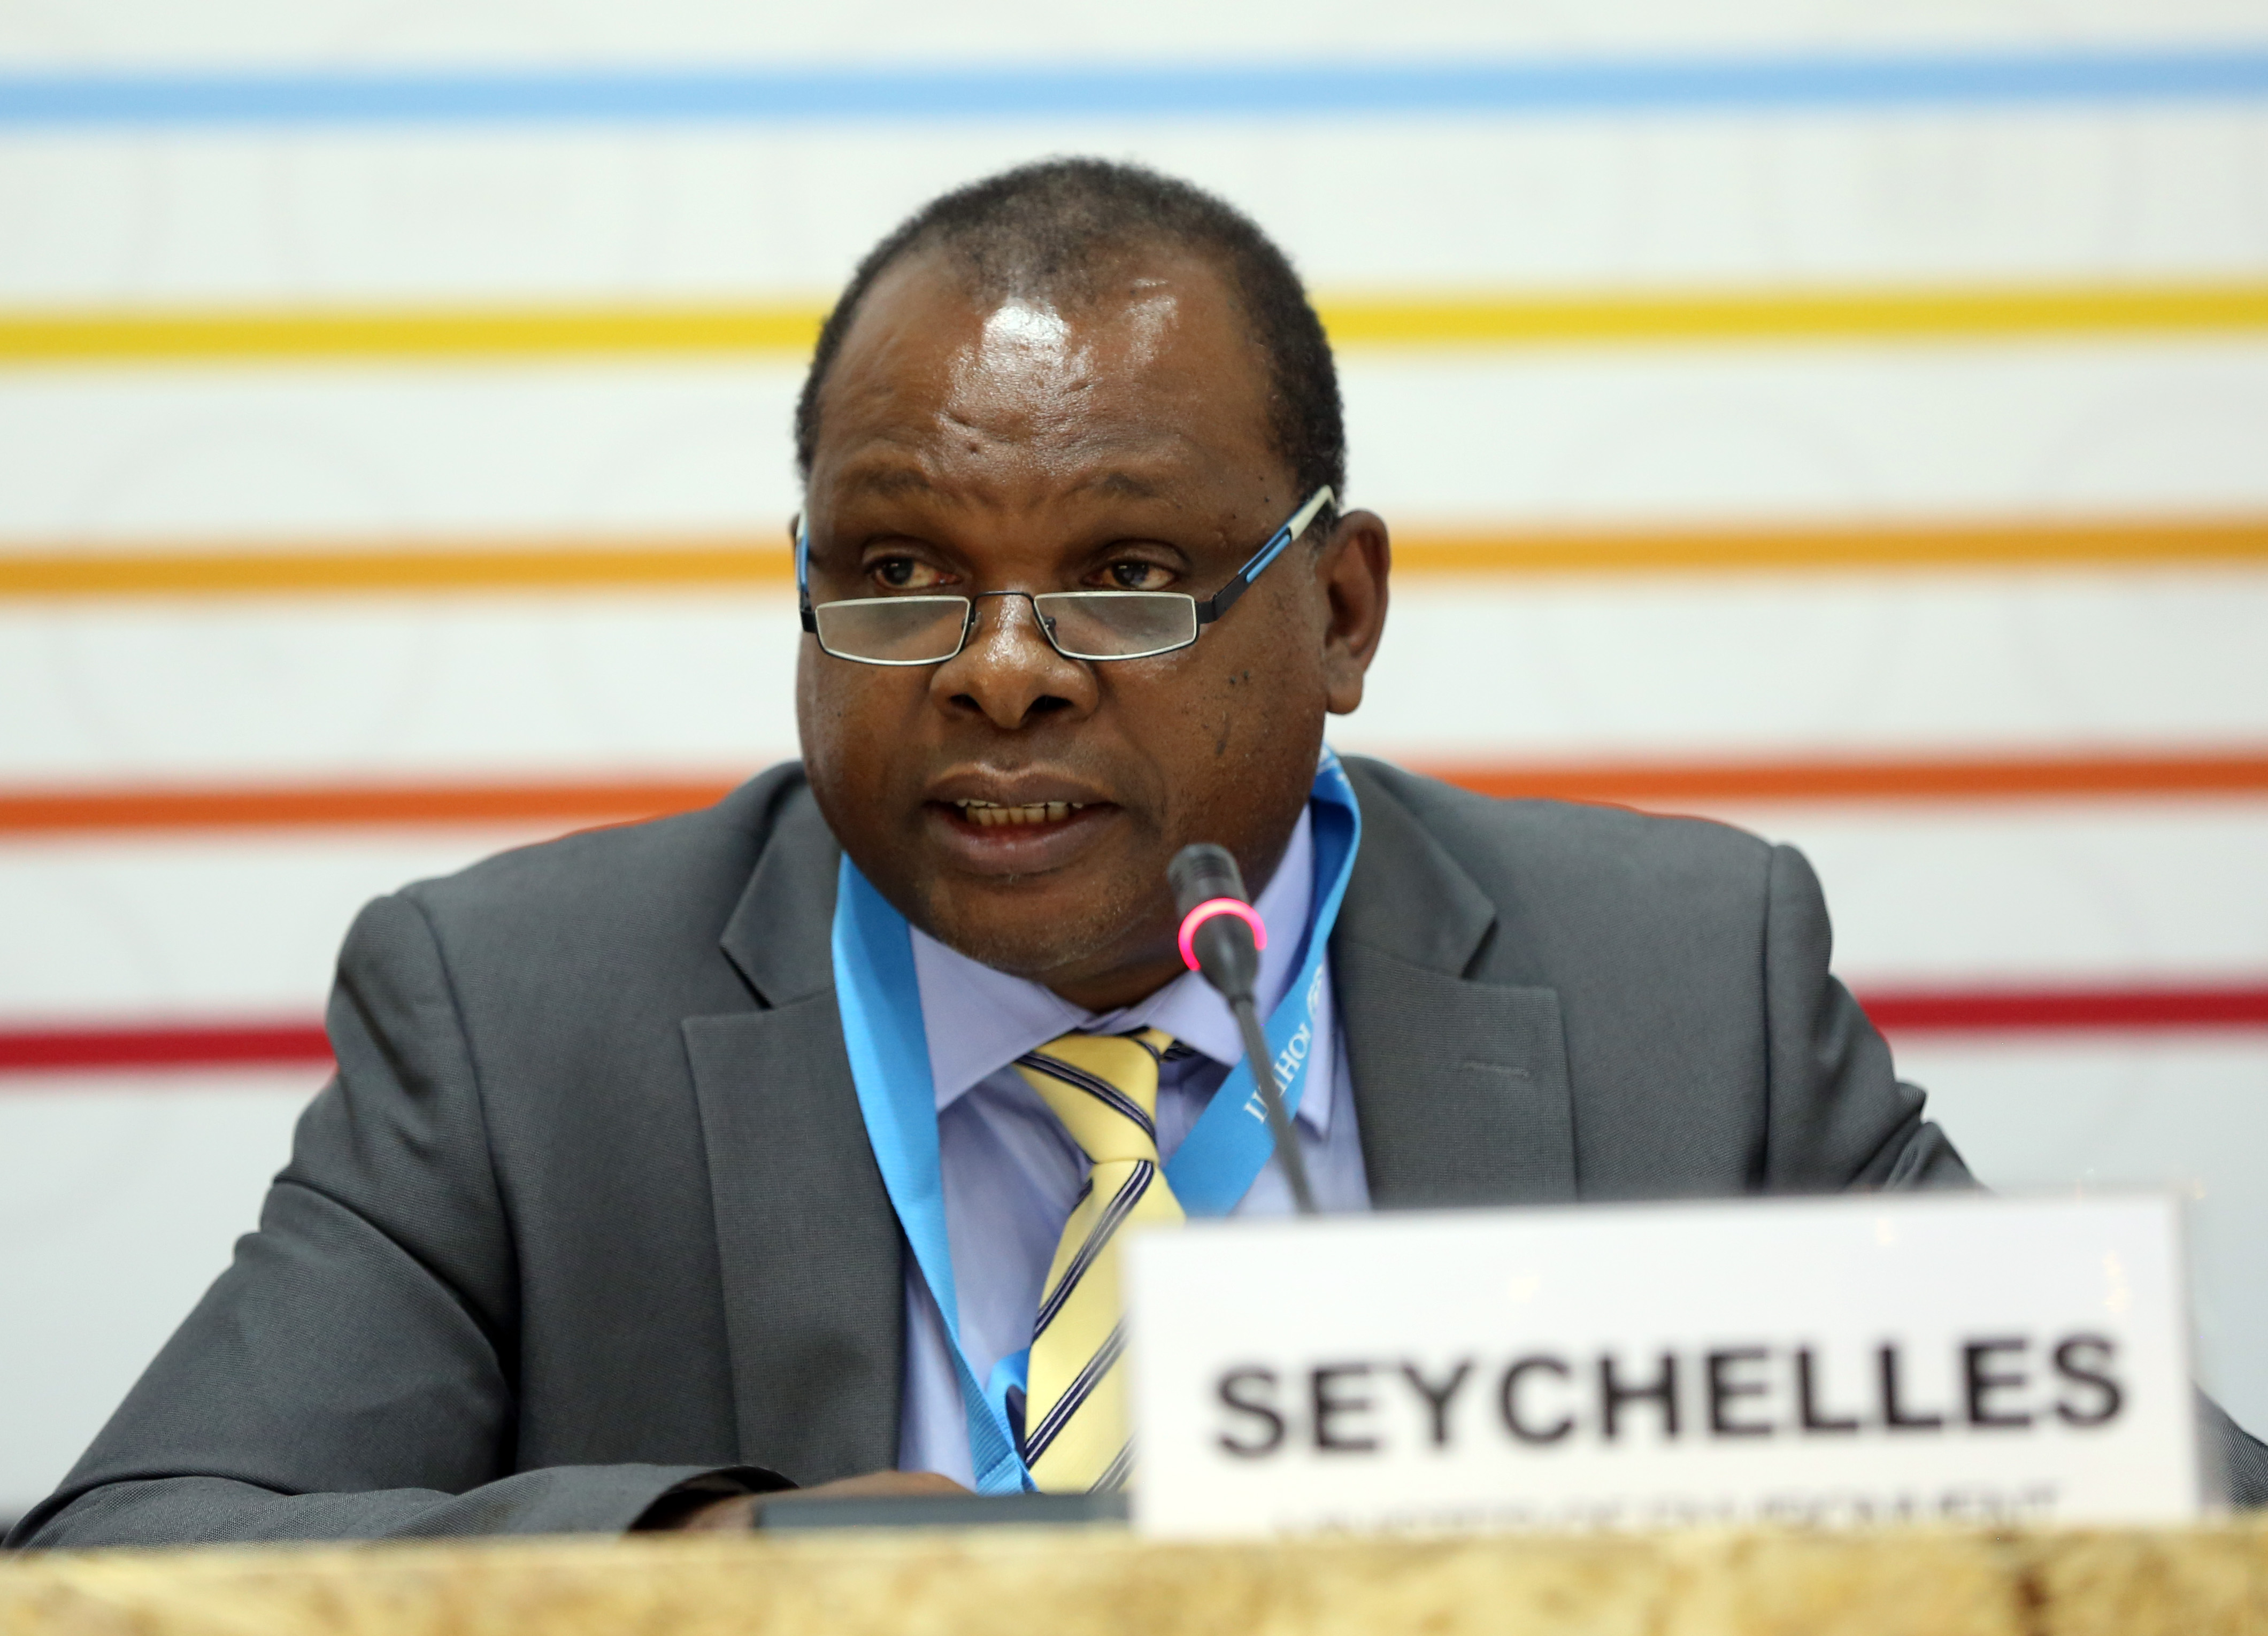 seychelles minister of tourism